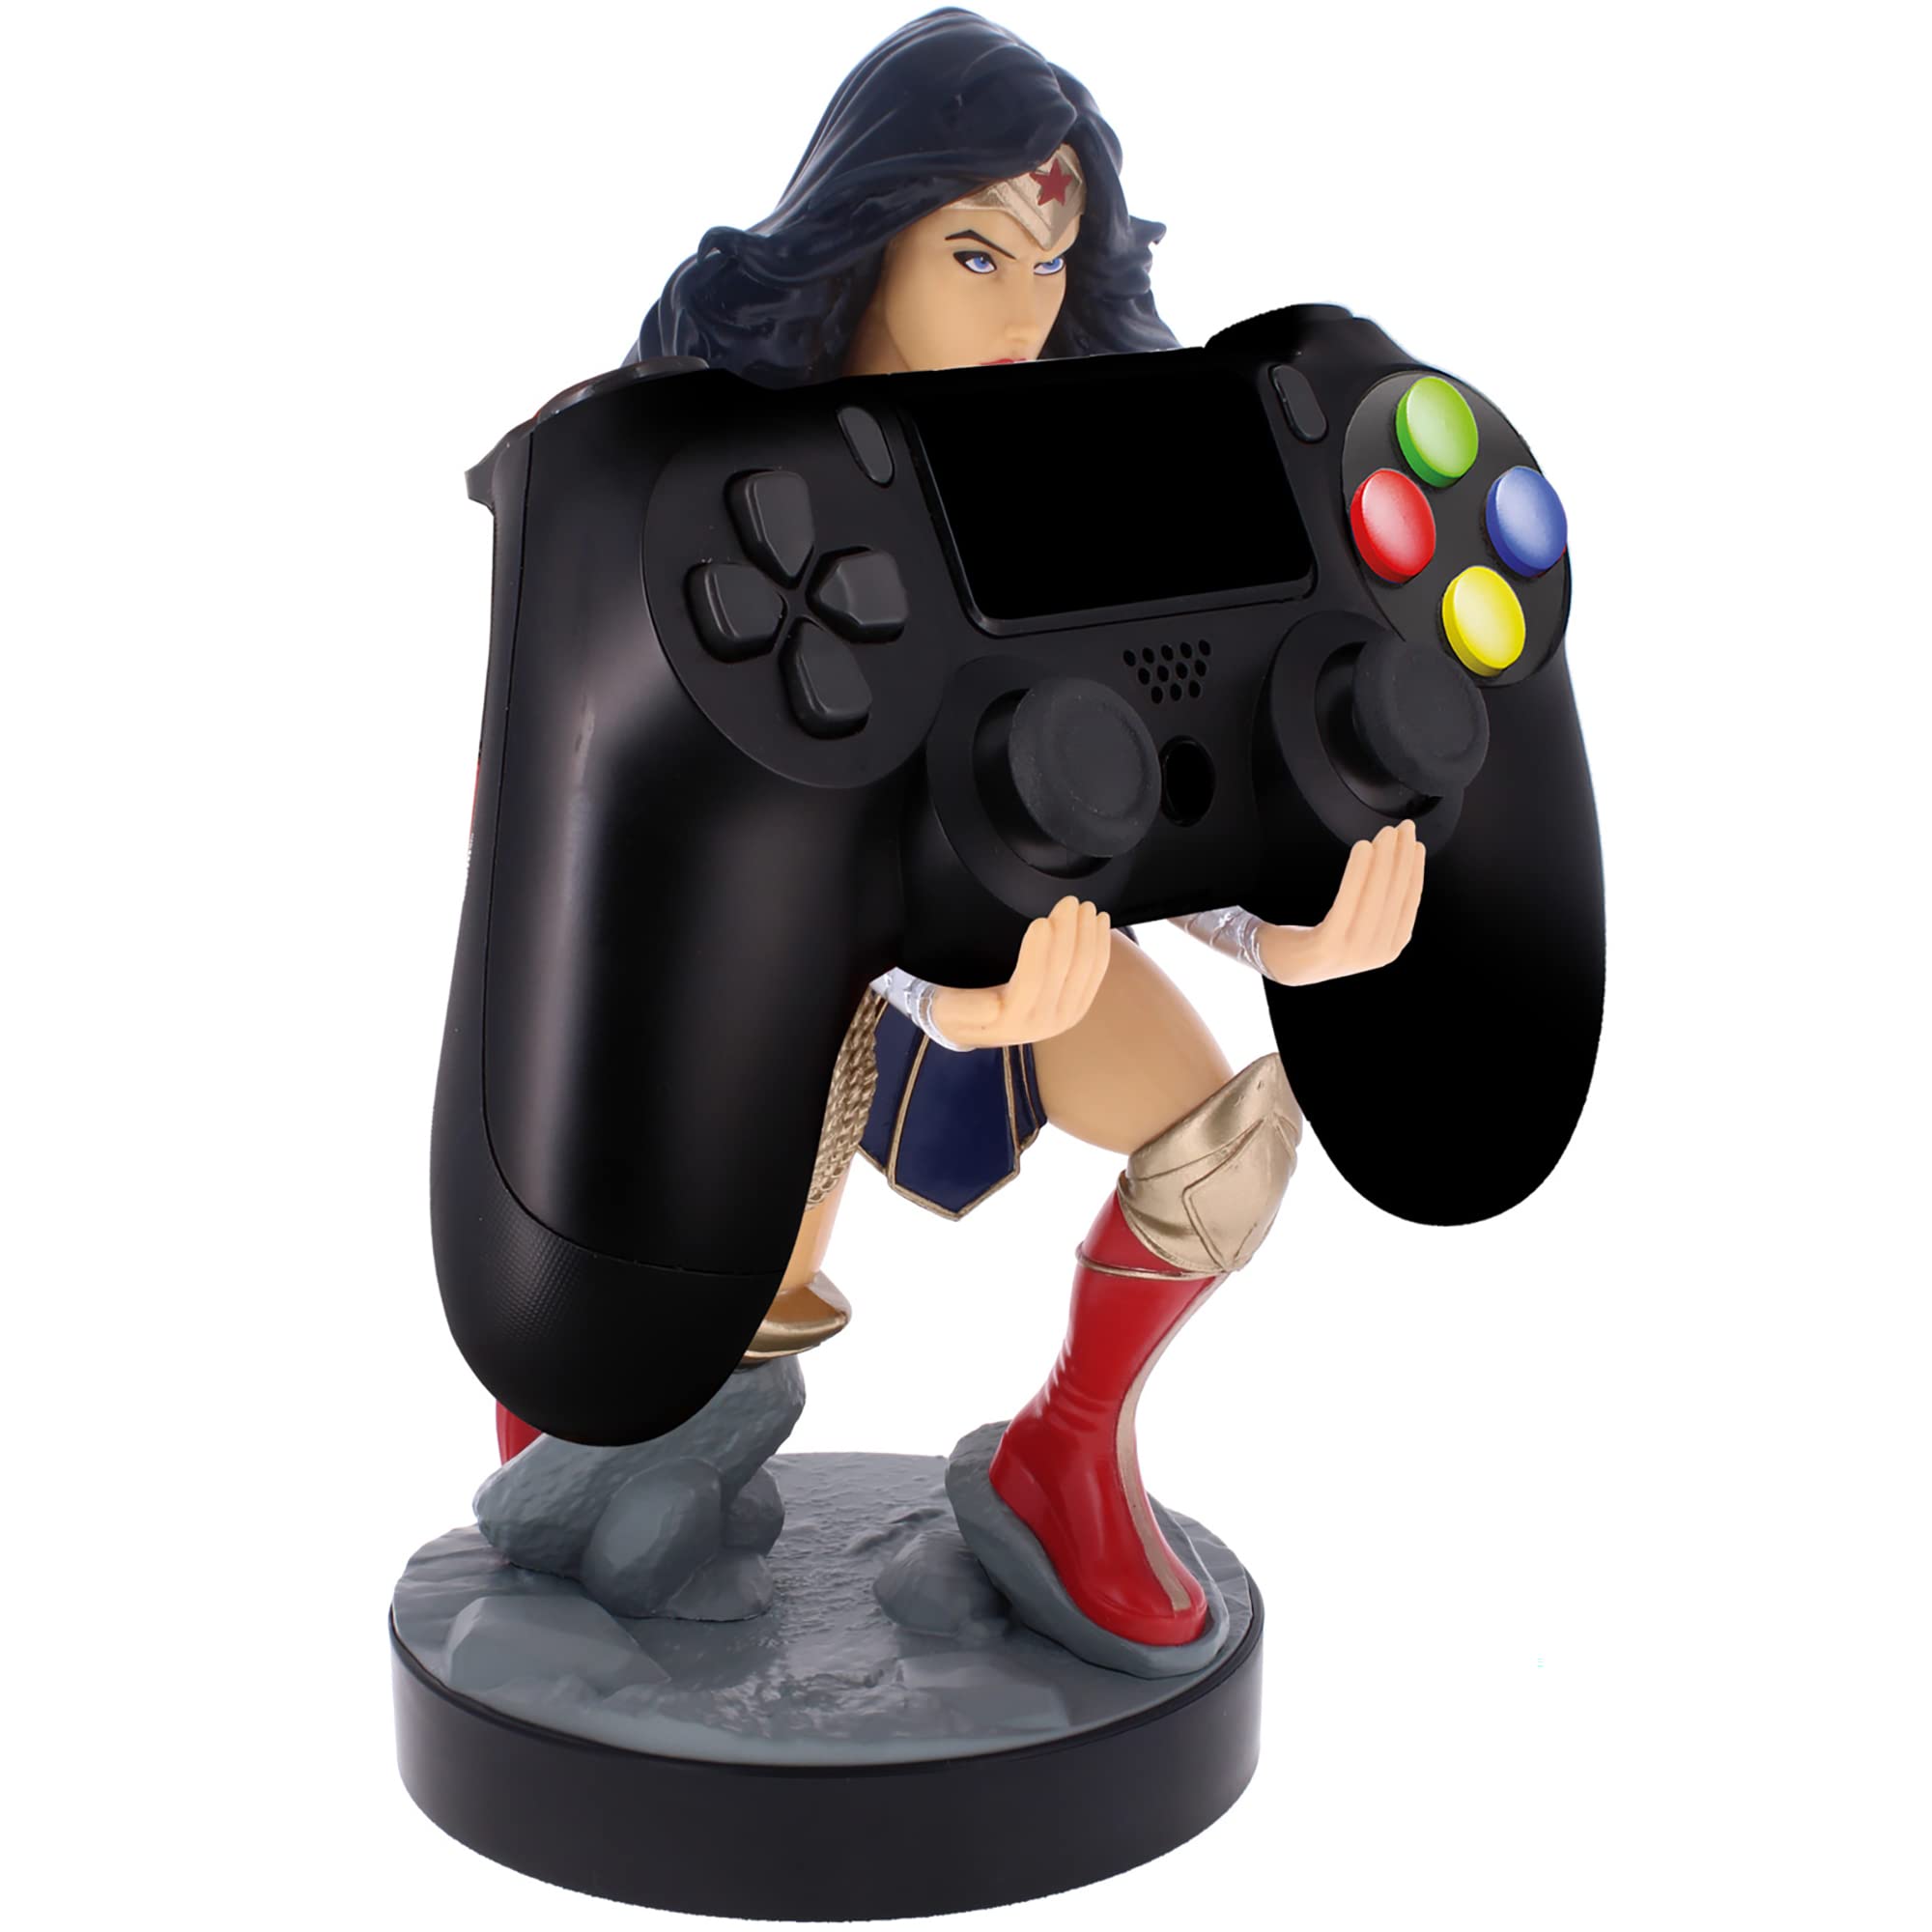 Exquisite Gaming - Wonder Woman Cable Guy (Net), Multicolor (CGCRDC400359)